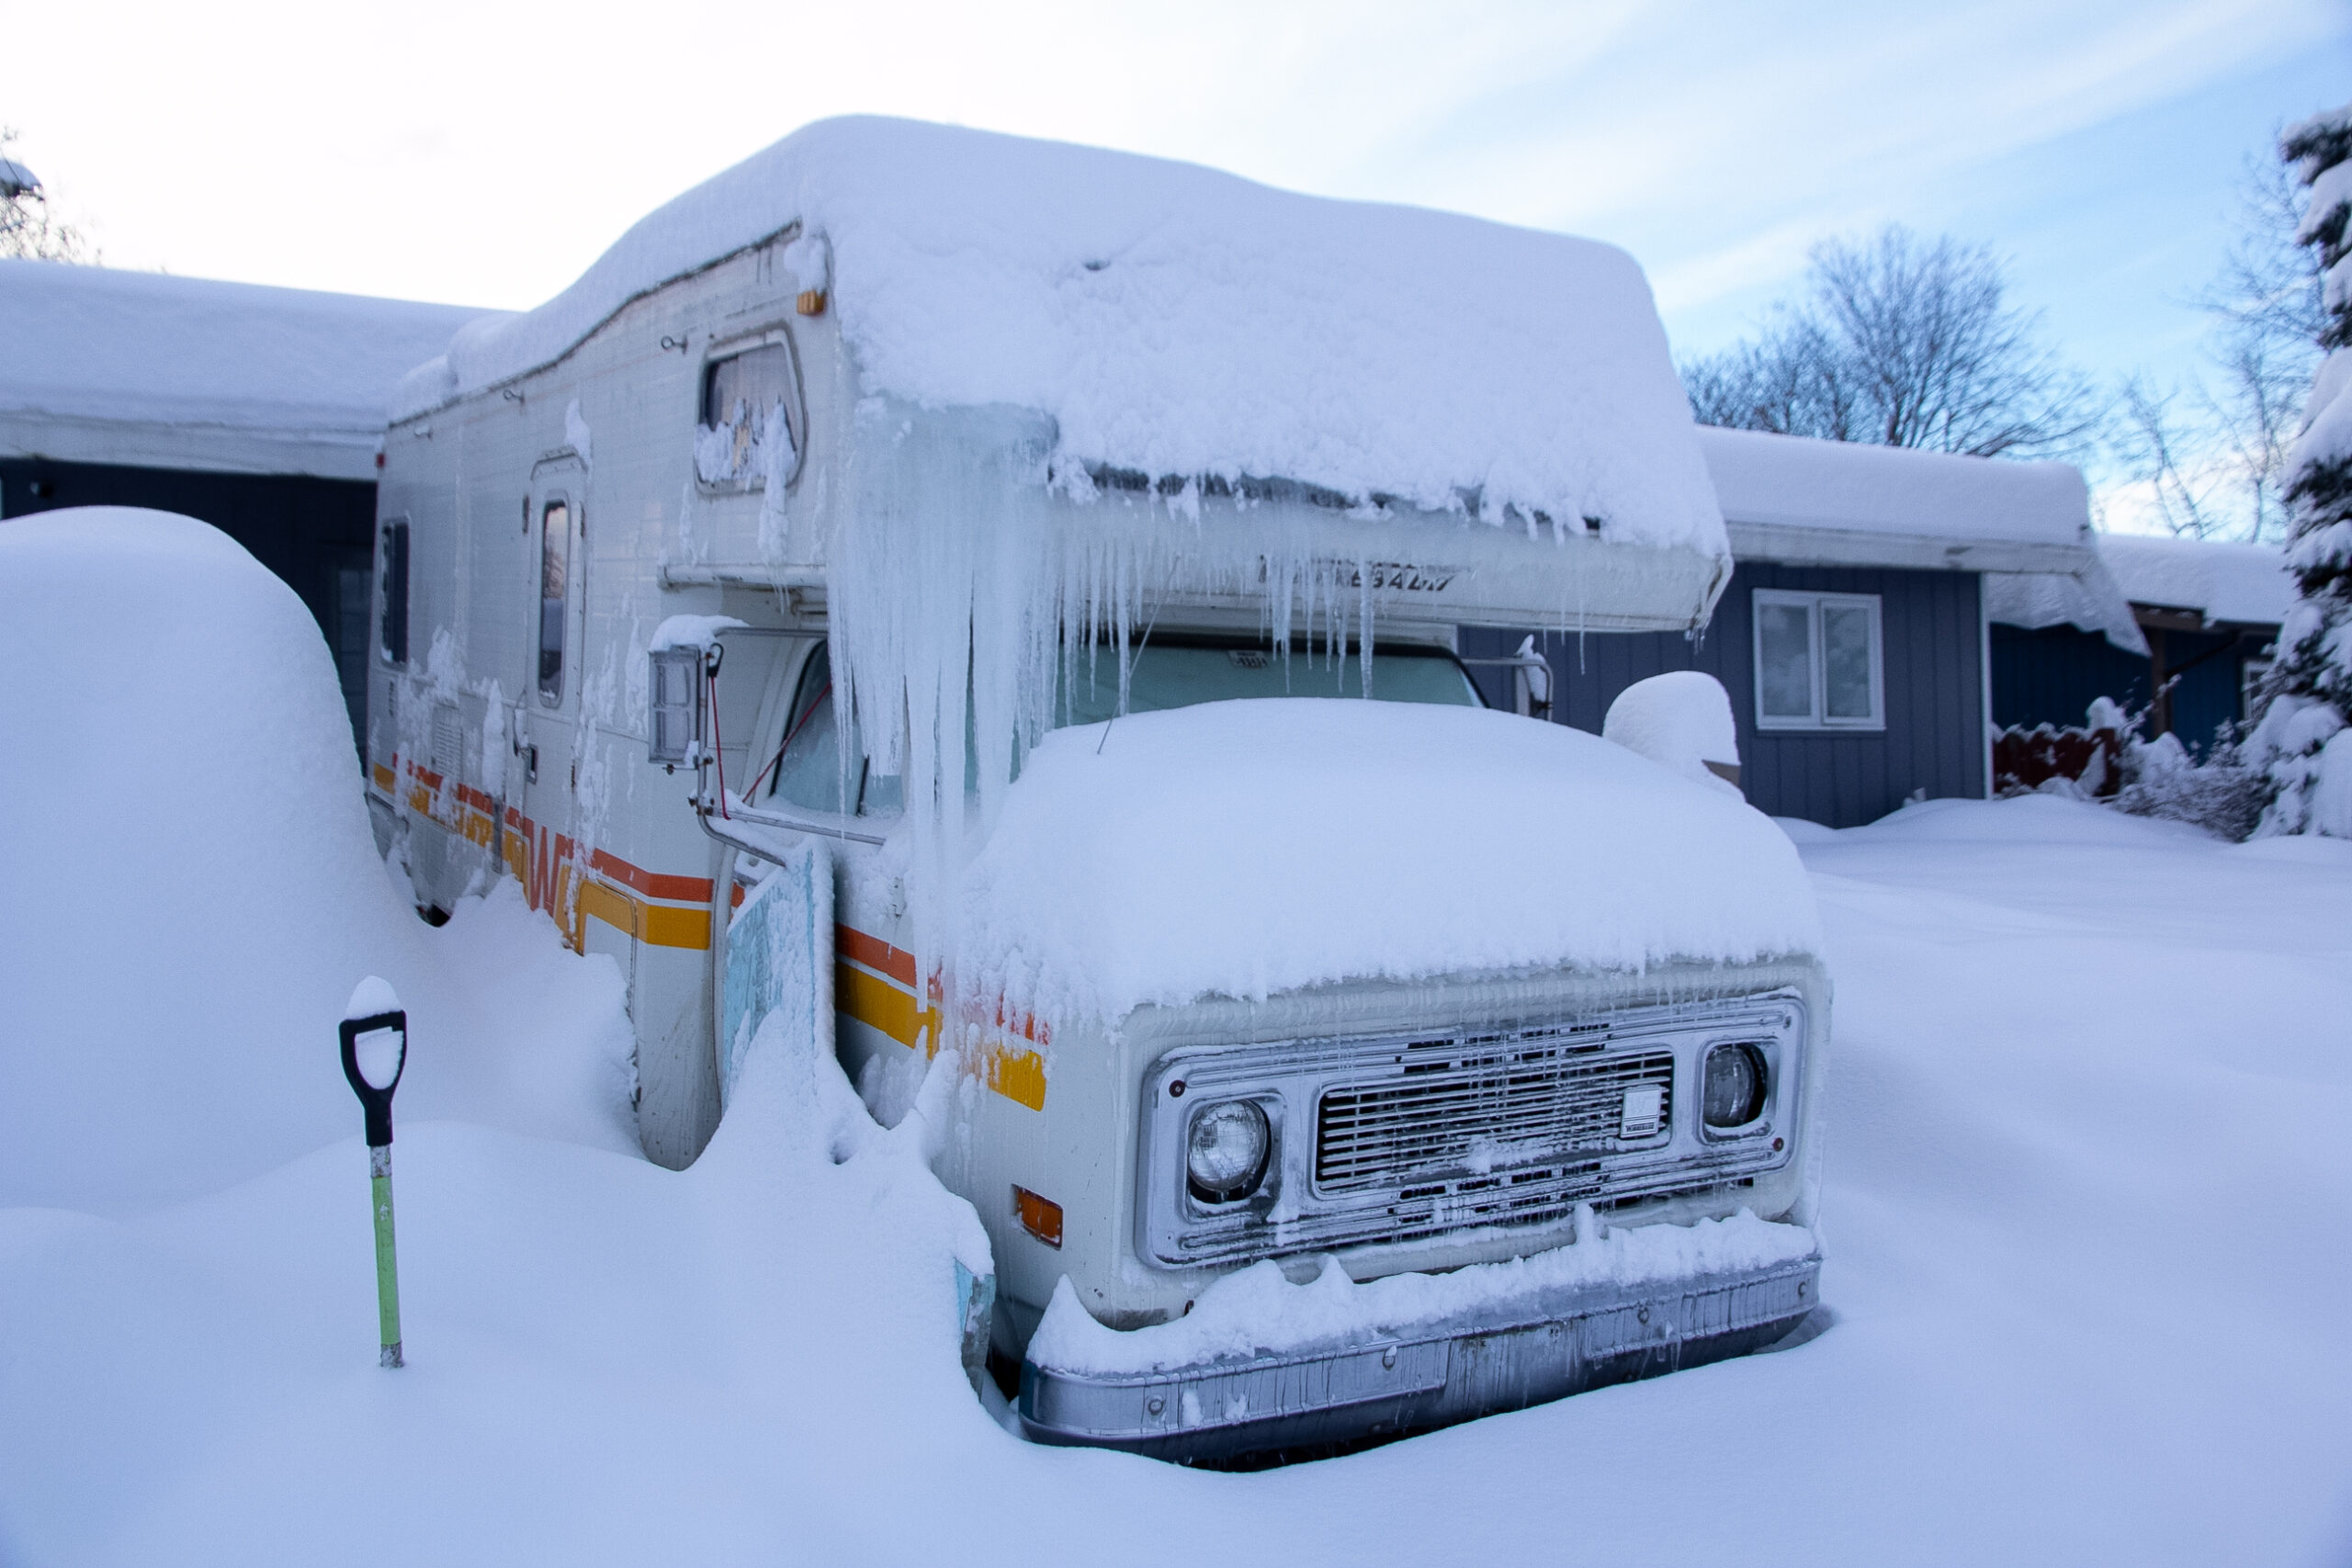 An RV is covered in snow and icicles hang from the roof.